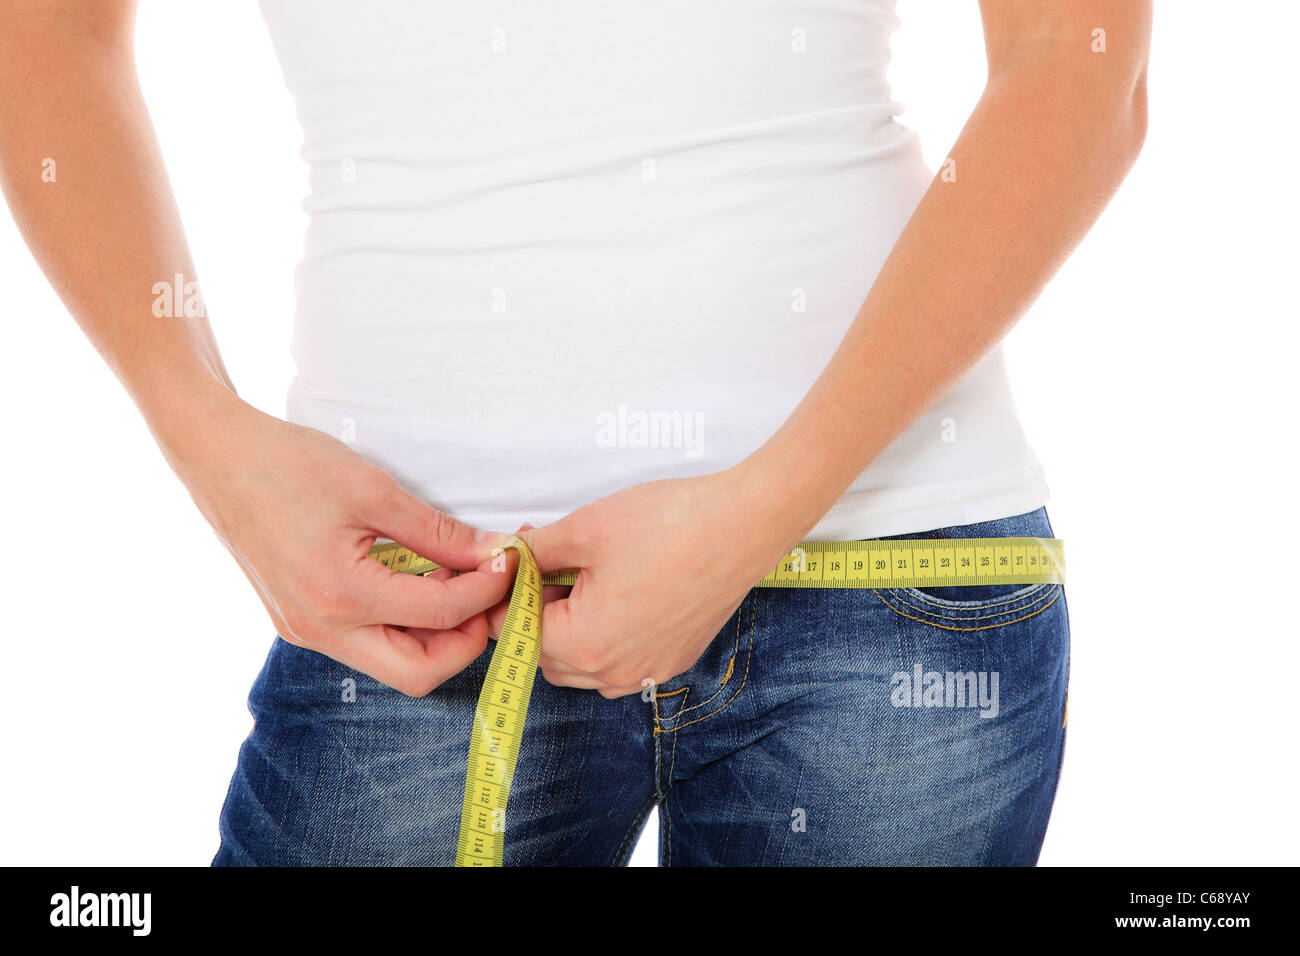 Slim Girl With Perfect Body Measuring Hips Stock Photo, Picture and Royalty  Free Image. Image 14754738.